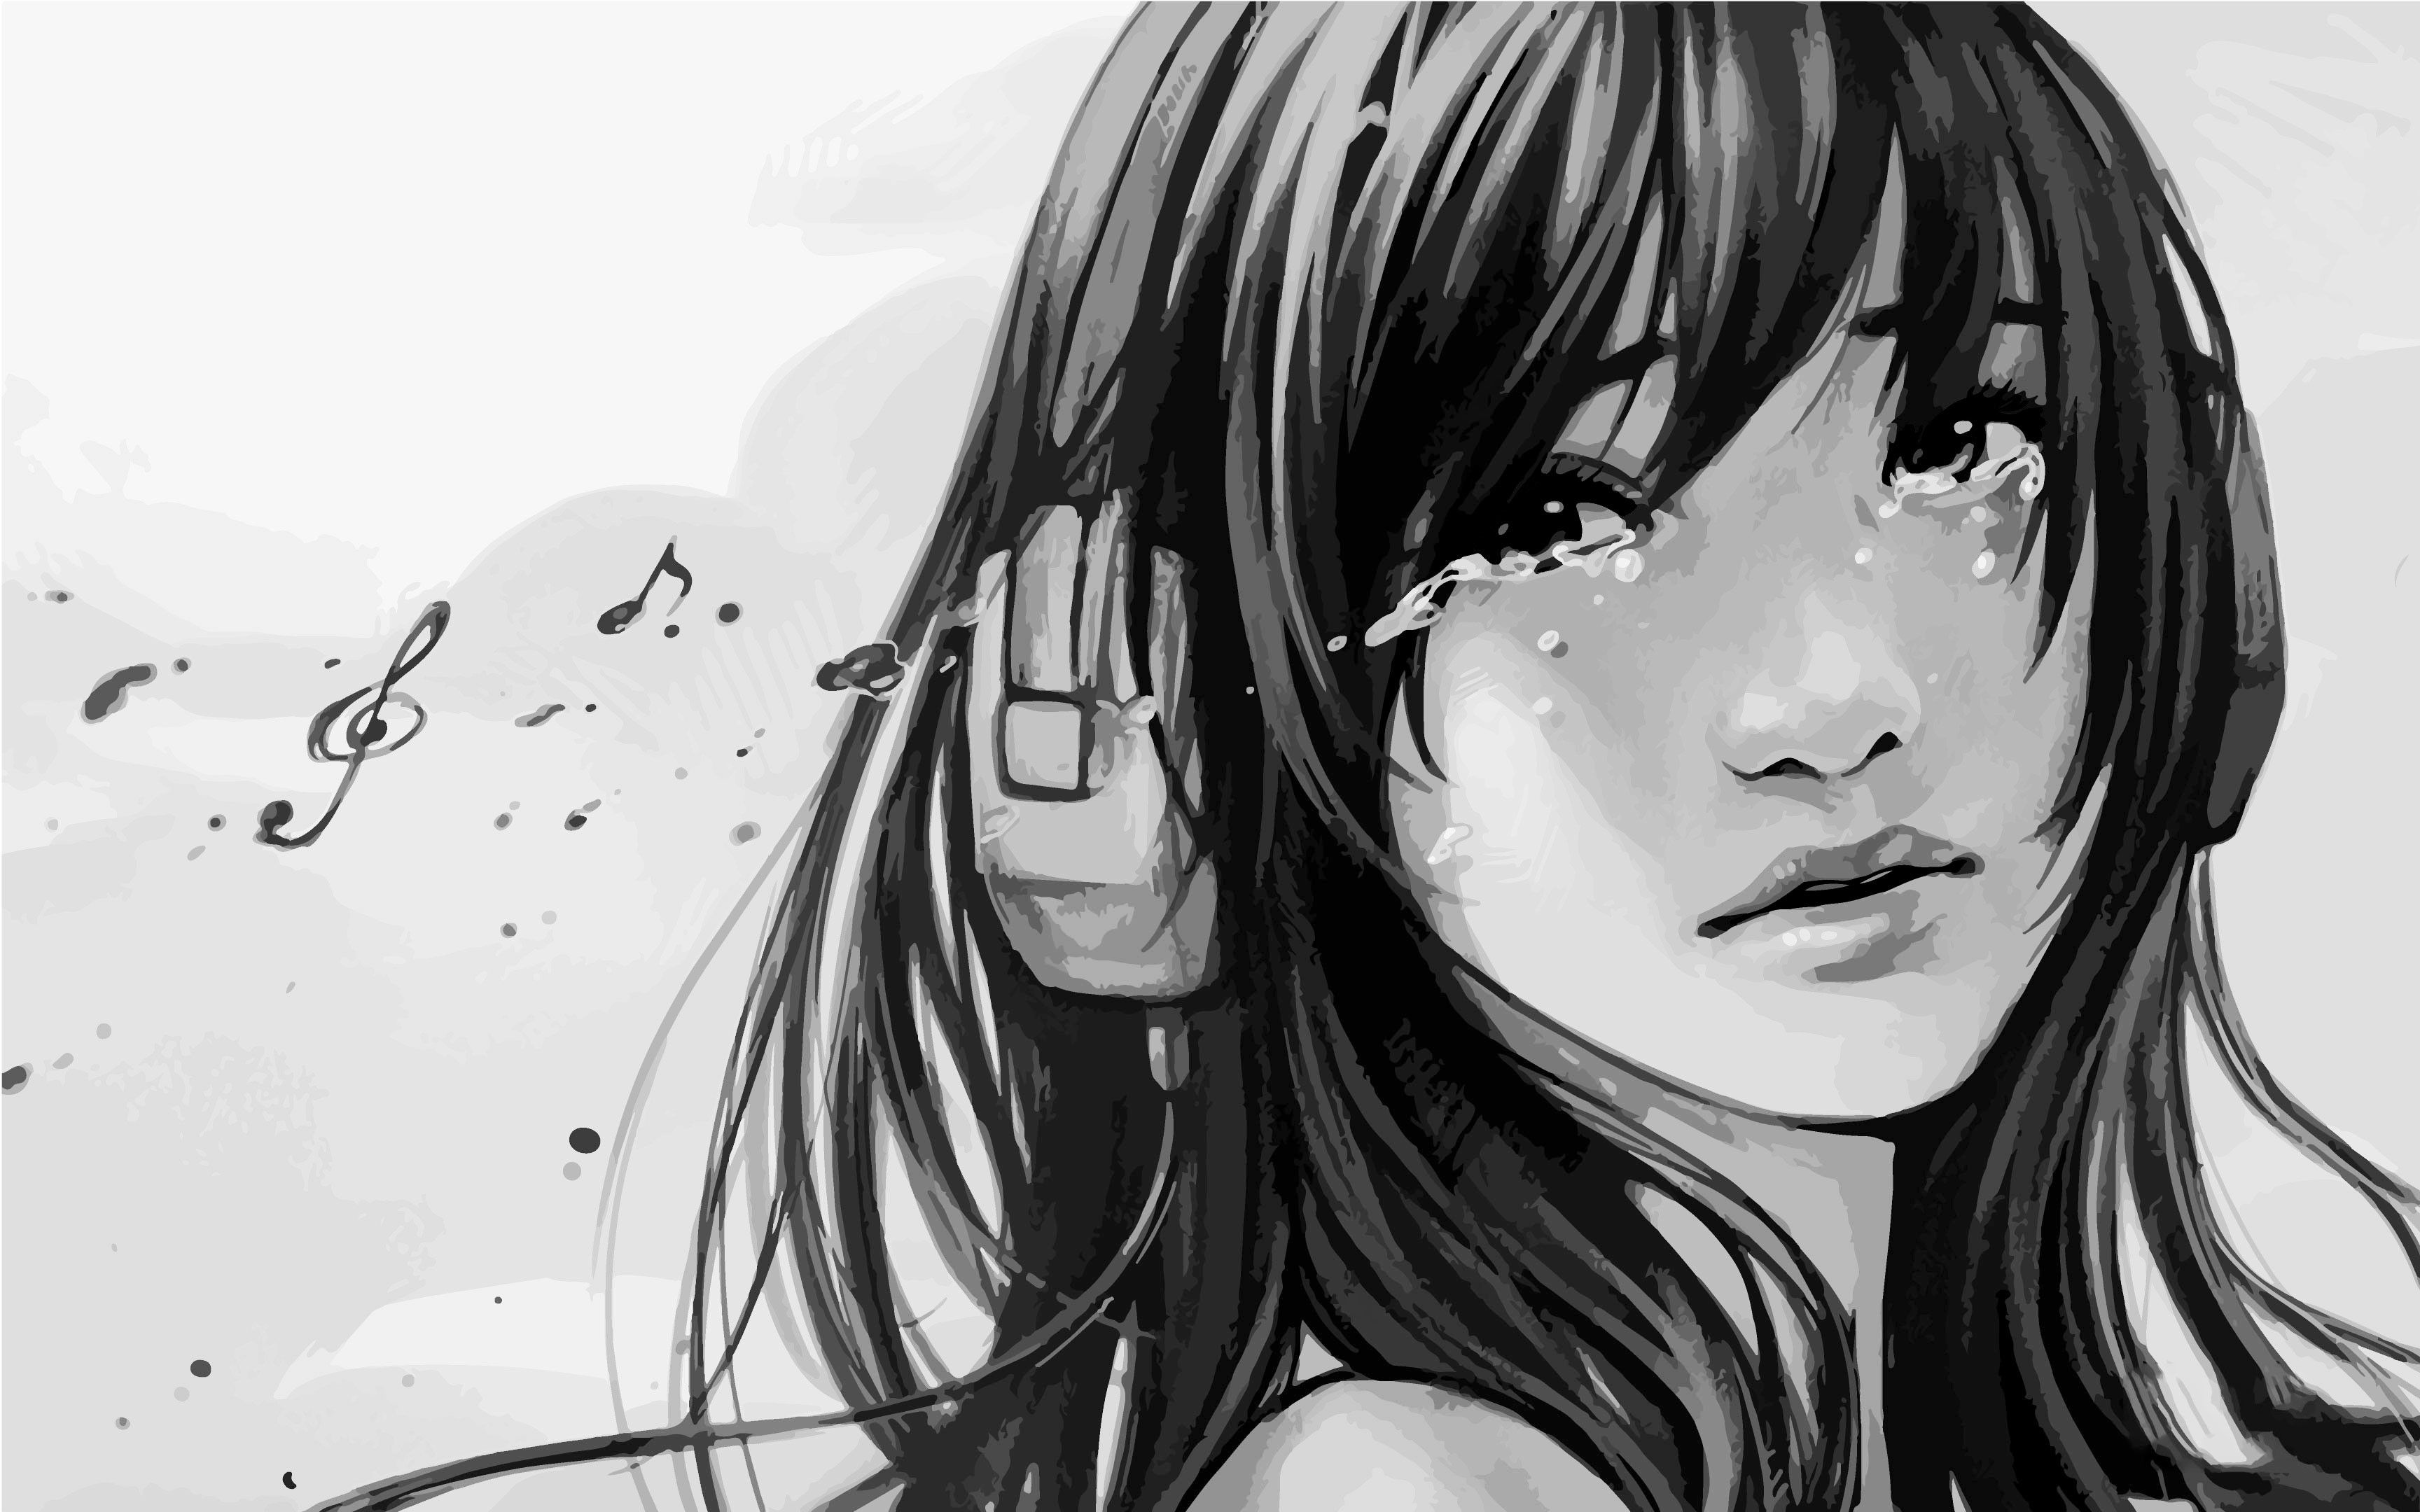 Sad Anime Faces Wallpapers posted by Christopher Sellers.